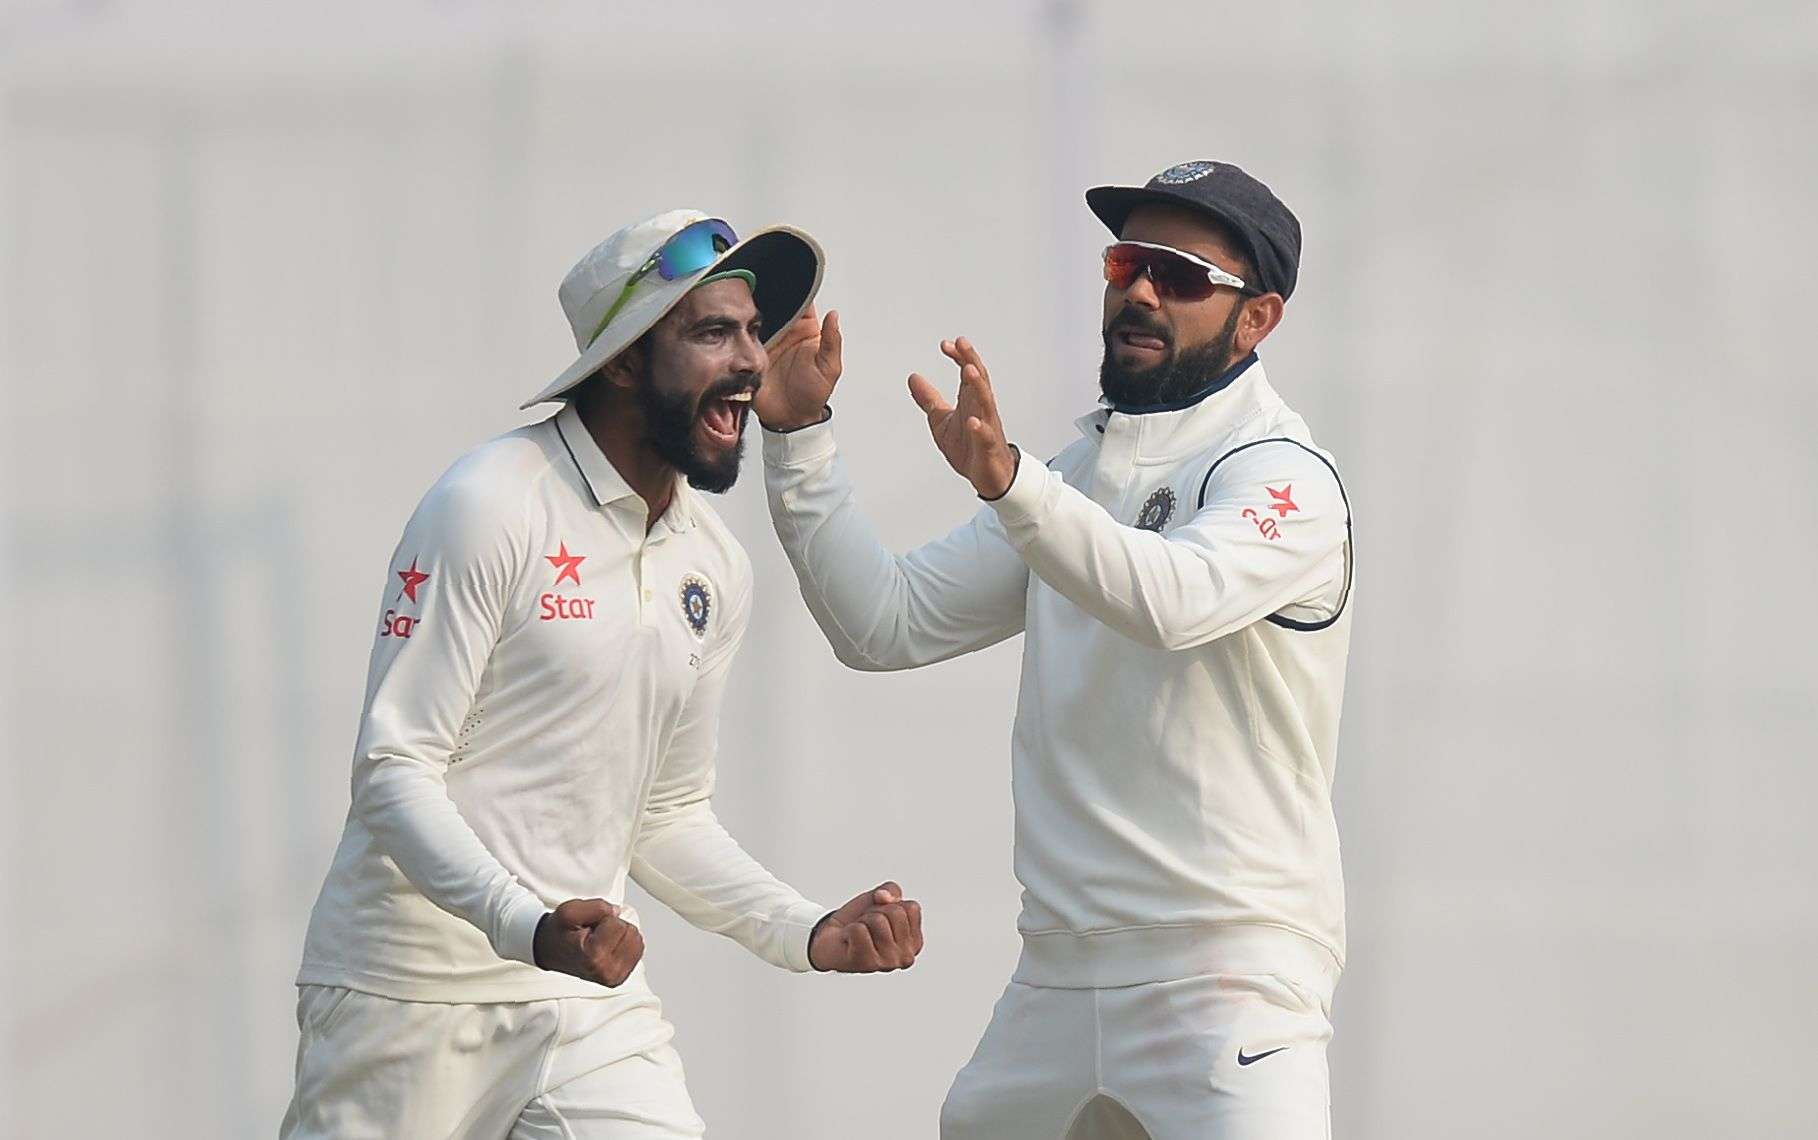 India cricketer Ravindra Jadeja (L) and captain Virat Kohli celebrate the dismissal of England batsman Jos Buttler on the fourth day of the third Test cricket match between India and England at The Punjab Cricket Association Stadium in Mohali on November 29, 2016. / AFP PHOTO / SAJJAD HUSSAIN / ----IMAGE RESTRICTED TO EDITORIAL USE - STRICTLY NO COMMERCIAL USE-----  GETTYOUT